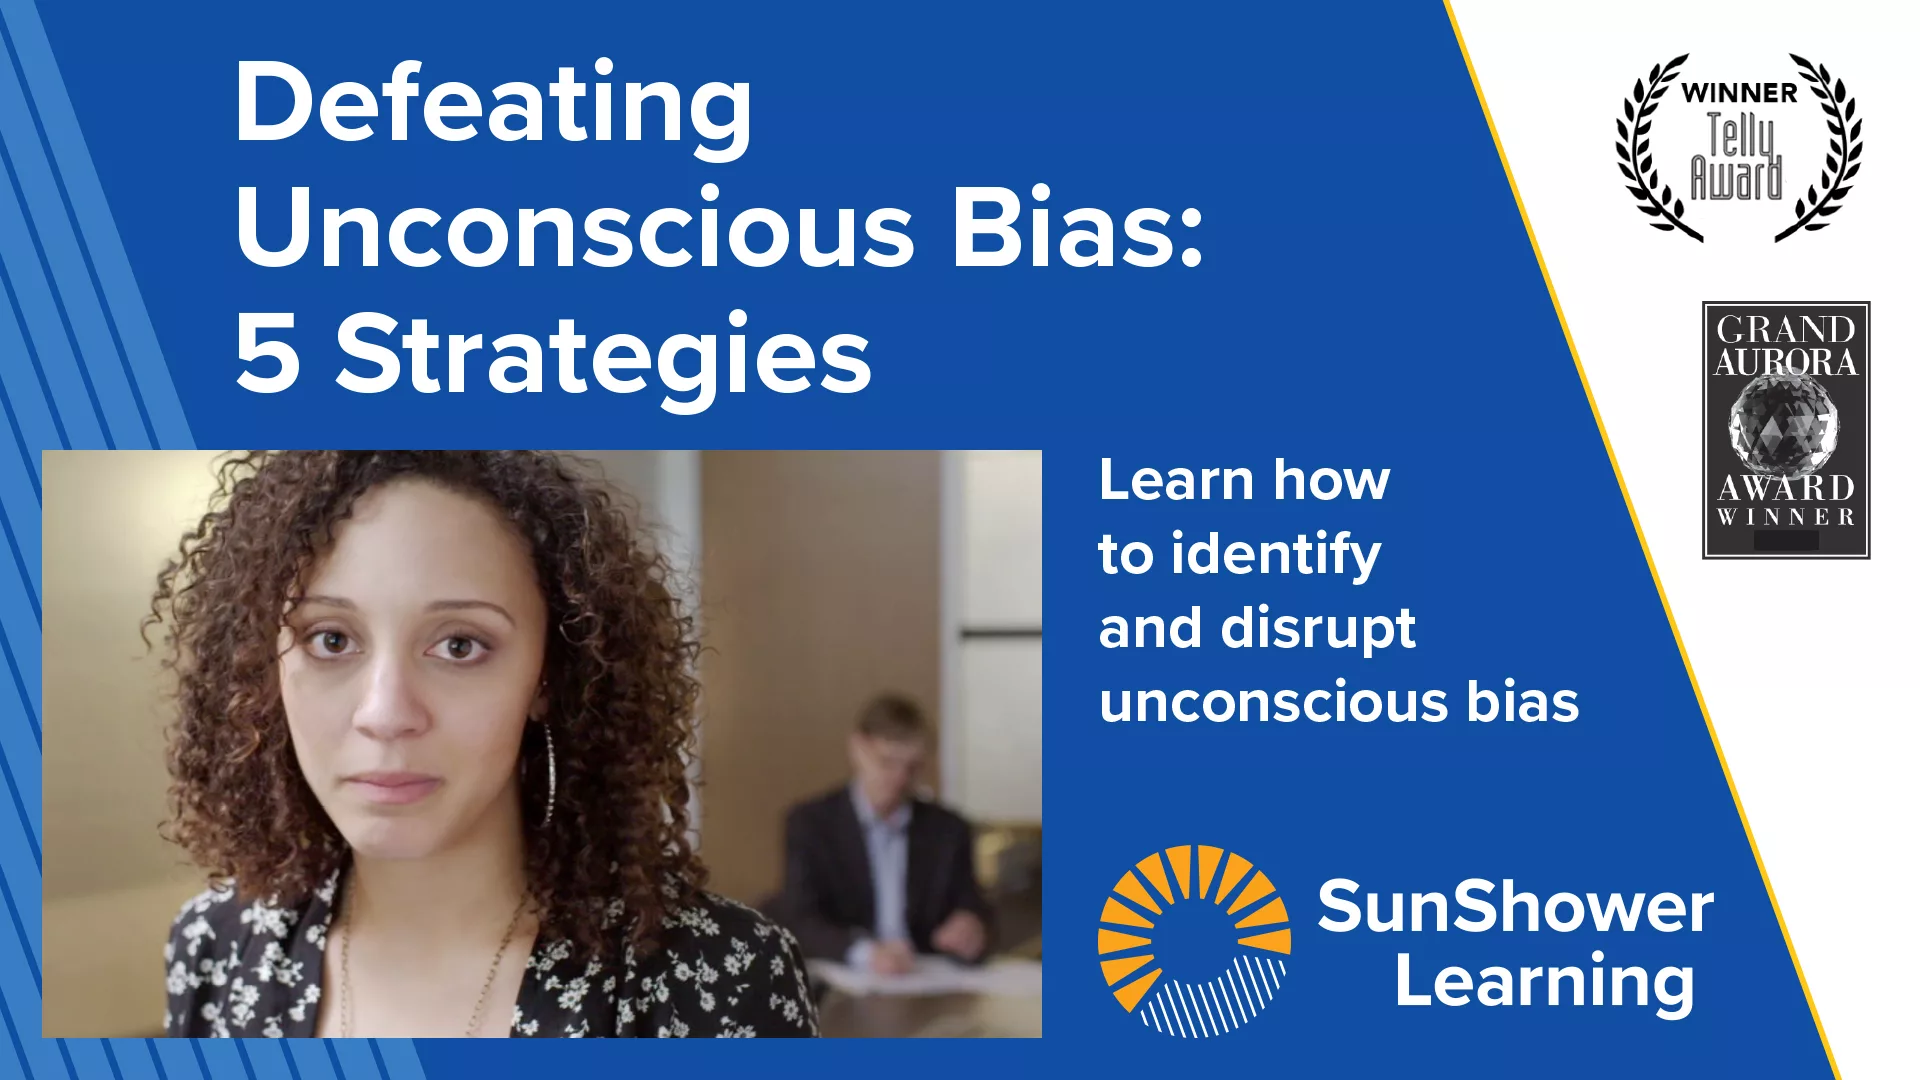 Thumbnail image with title, Defeating Unconscious Bias: 5 Strategies and text, Learn how to identify and disrupt unconscious bias. Telly award seal.